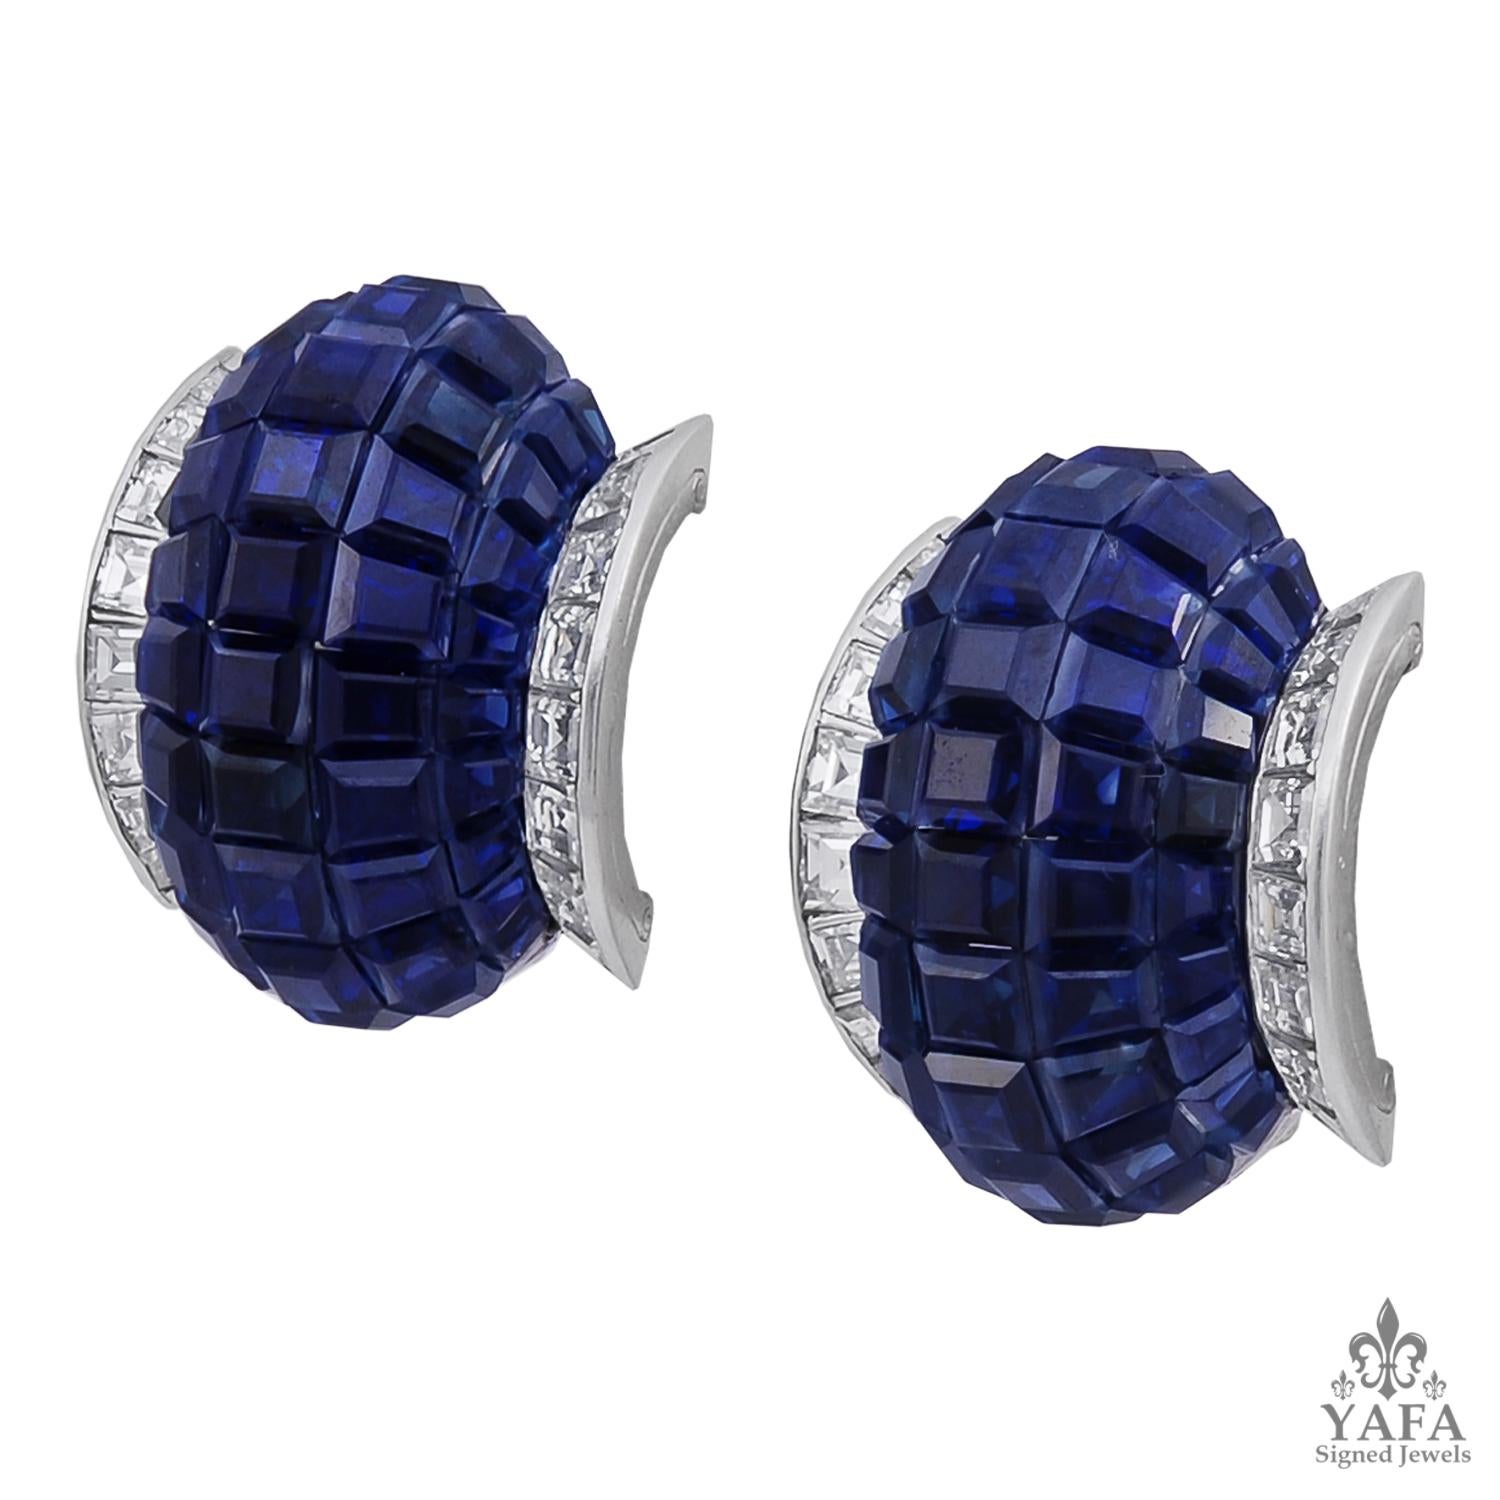 VAN CLEEF & ARPELS Mystery-Set Sapphire, Diamond Earrings
A pair of platinum ear clips, set with diamond and sapphire, signed Van Cleef & Arpels.
dimensions approx. 0.90″ in length by 0.70″ in width
Signed ” V.C.A.“; circa 1970s